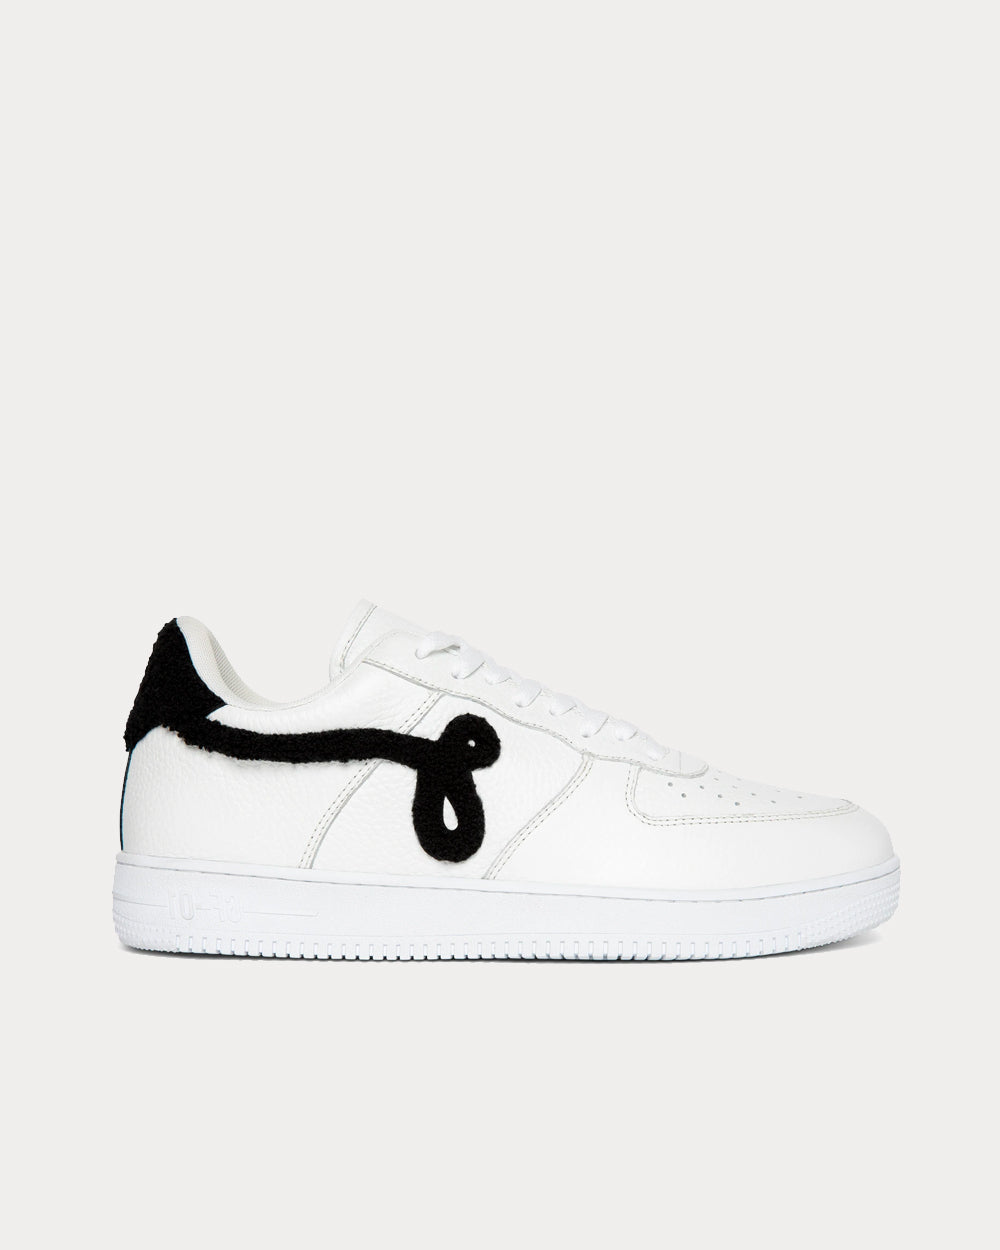 John Geiger - GF-01 'White Pebbled Leather Black Chenille' Low Top Sneakers